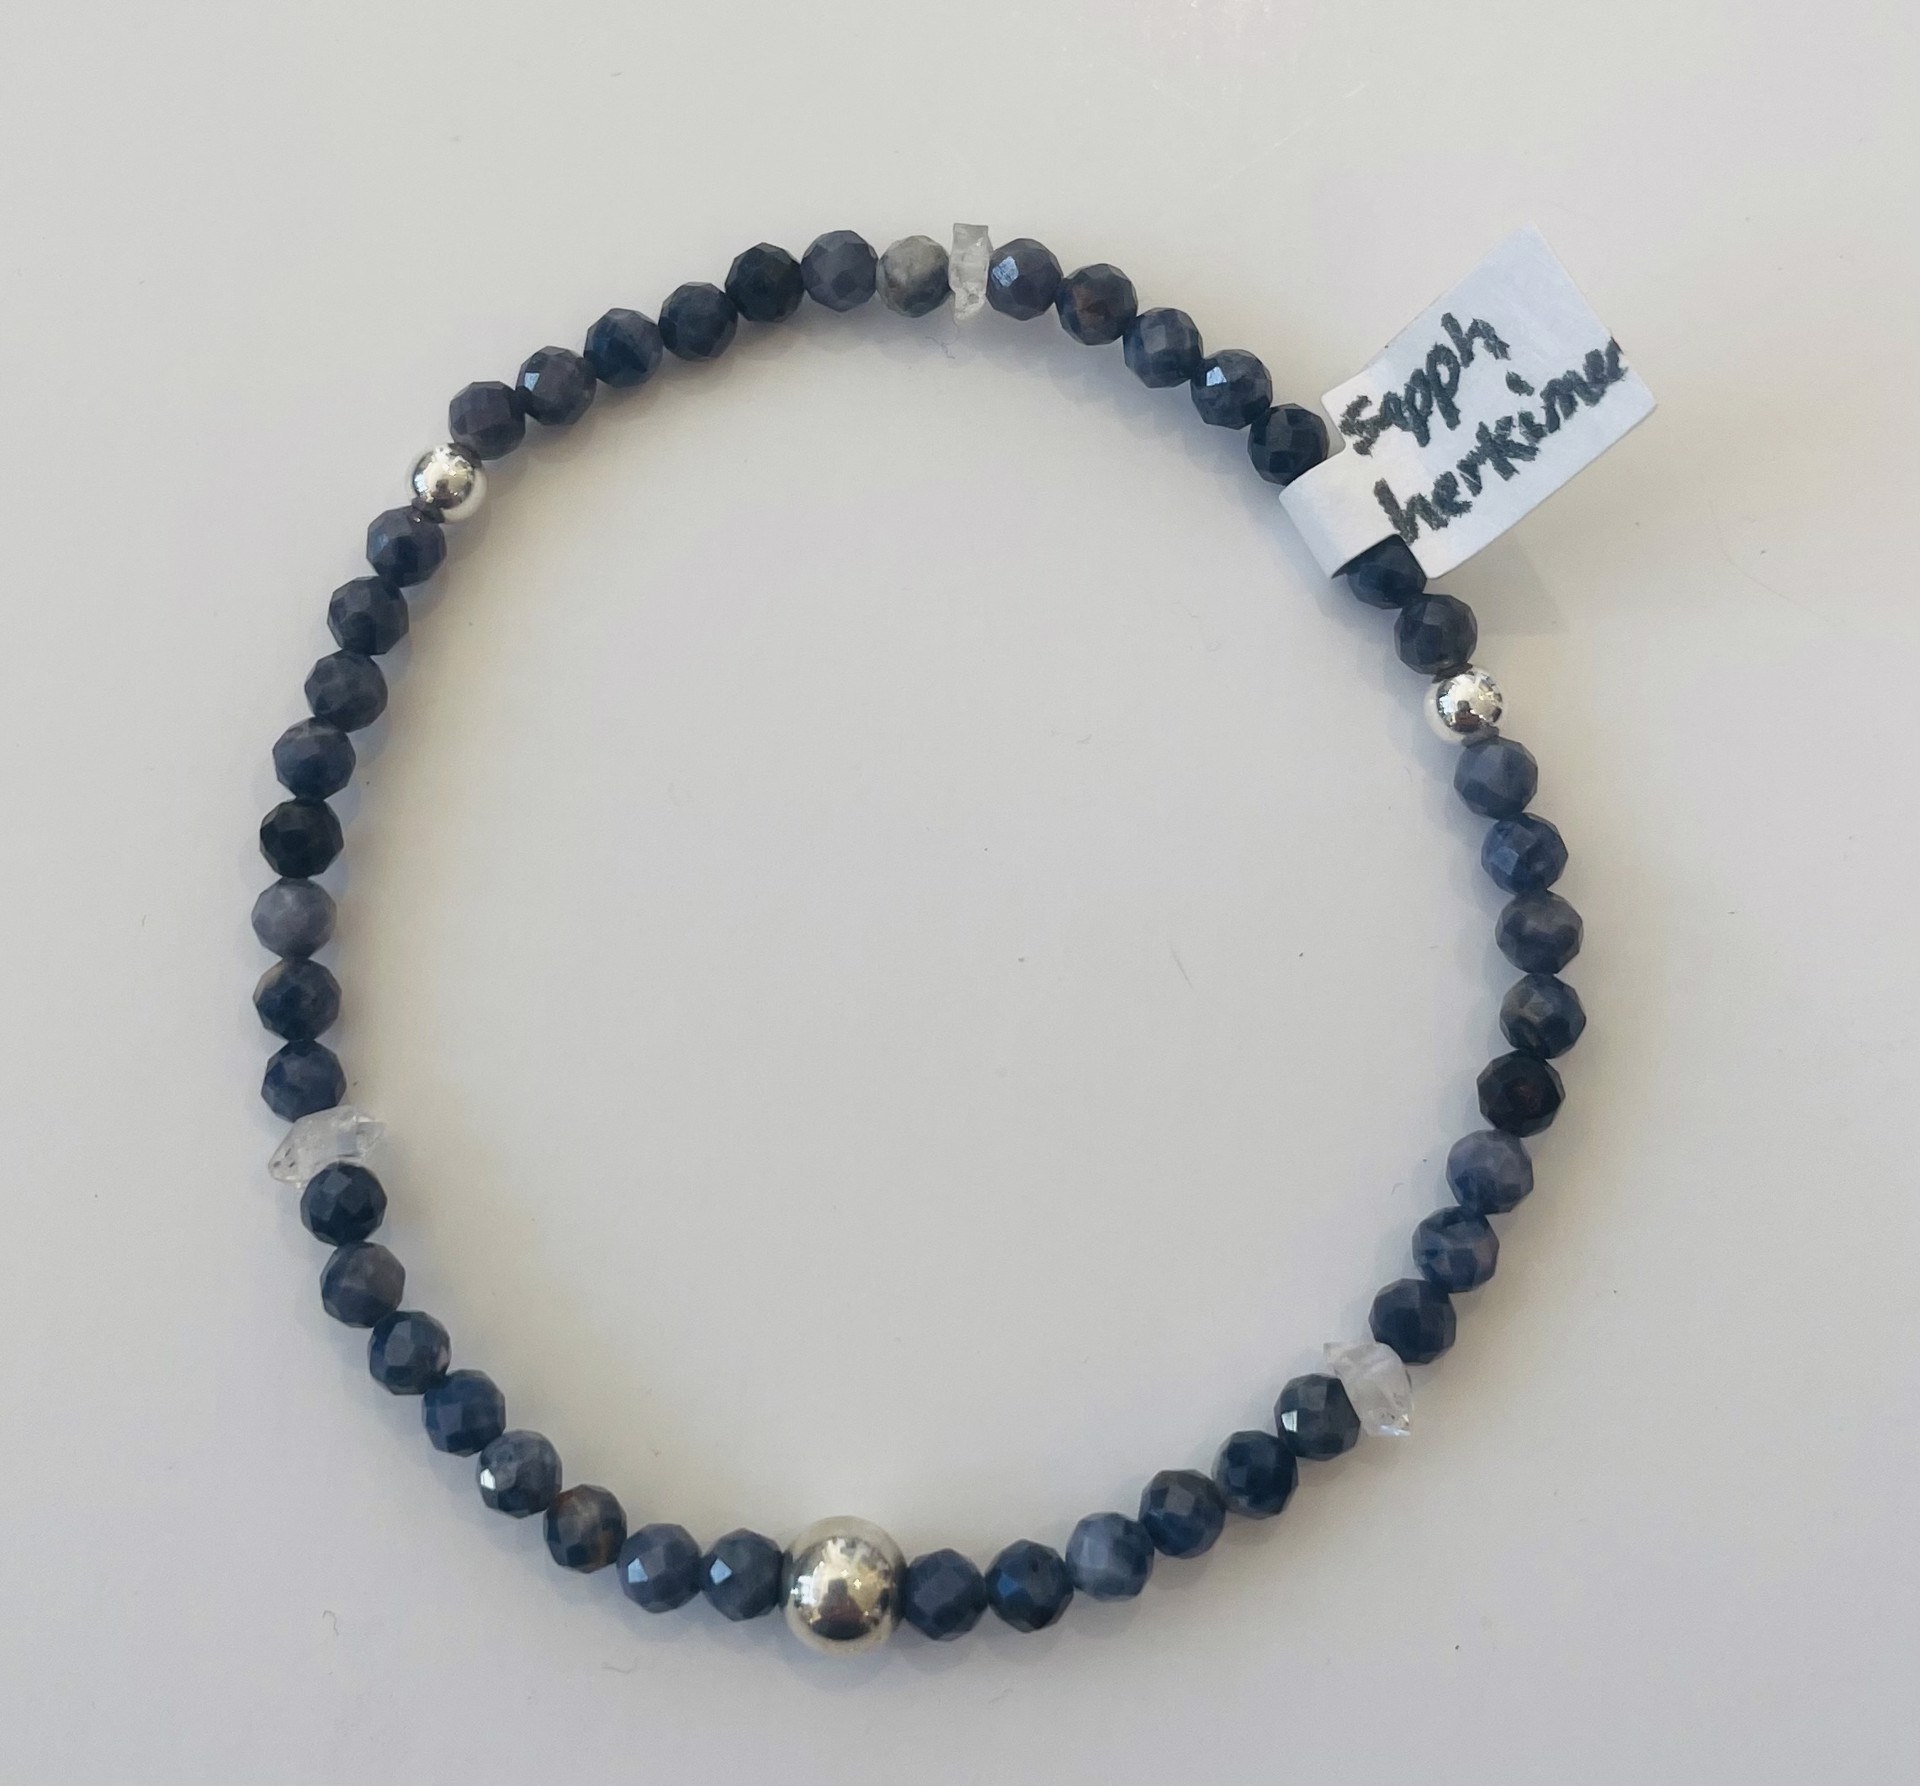 Faceted Sapphires with Herkimer Diamonds and Sterling Bracelet by Emelie Hebert